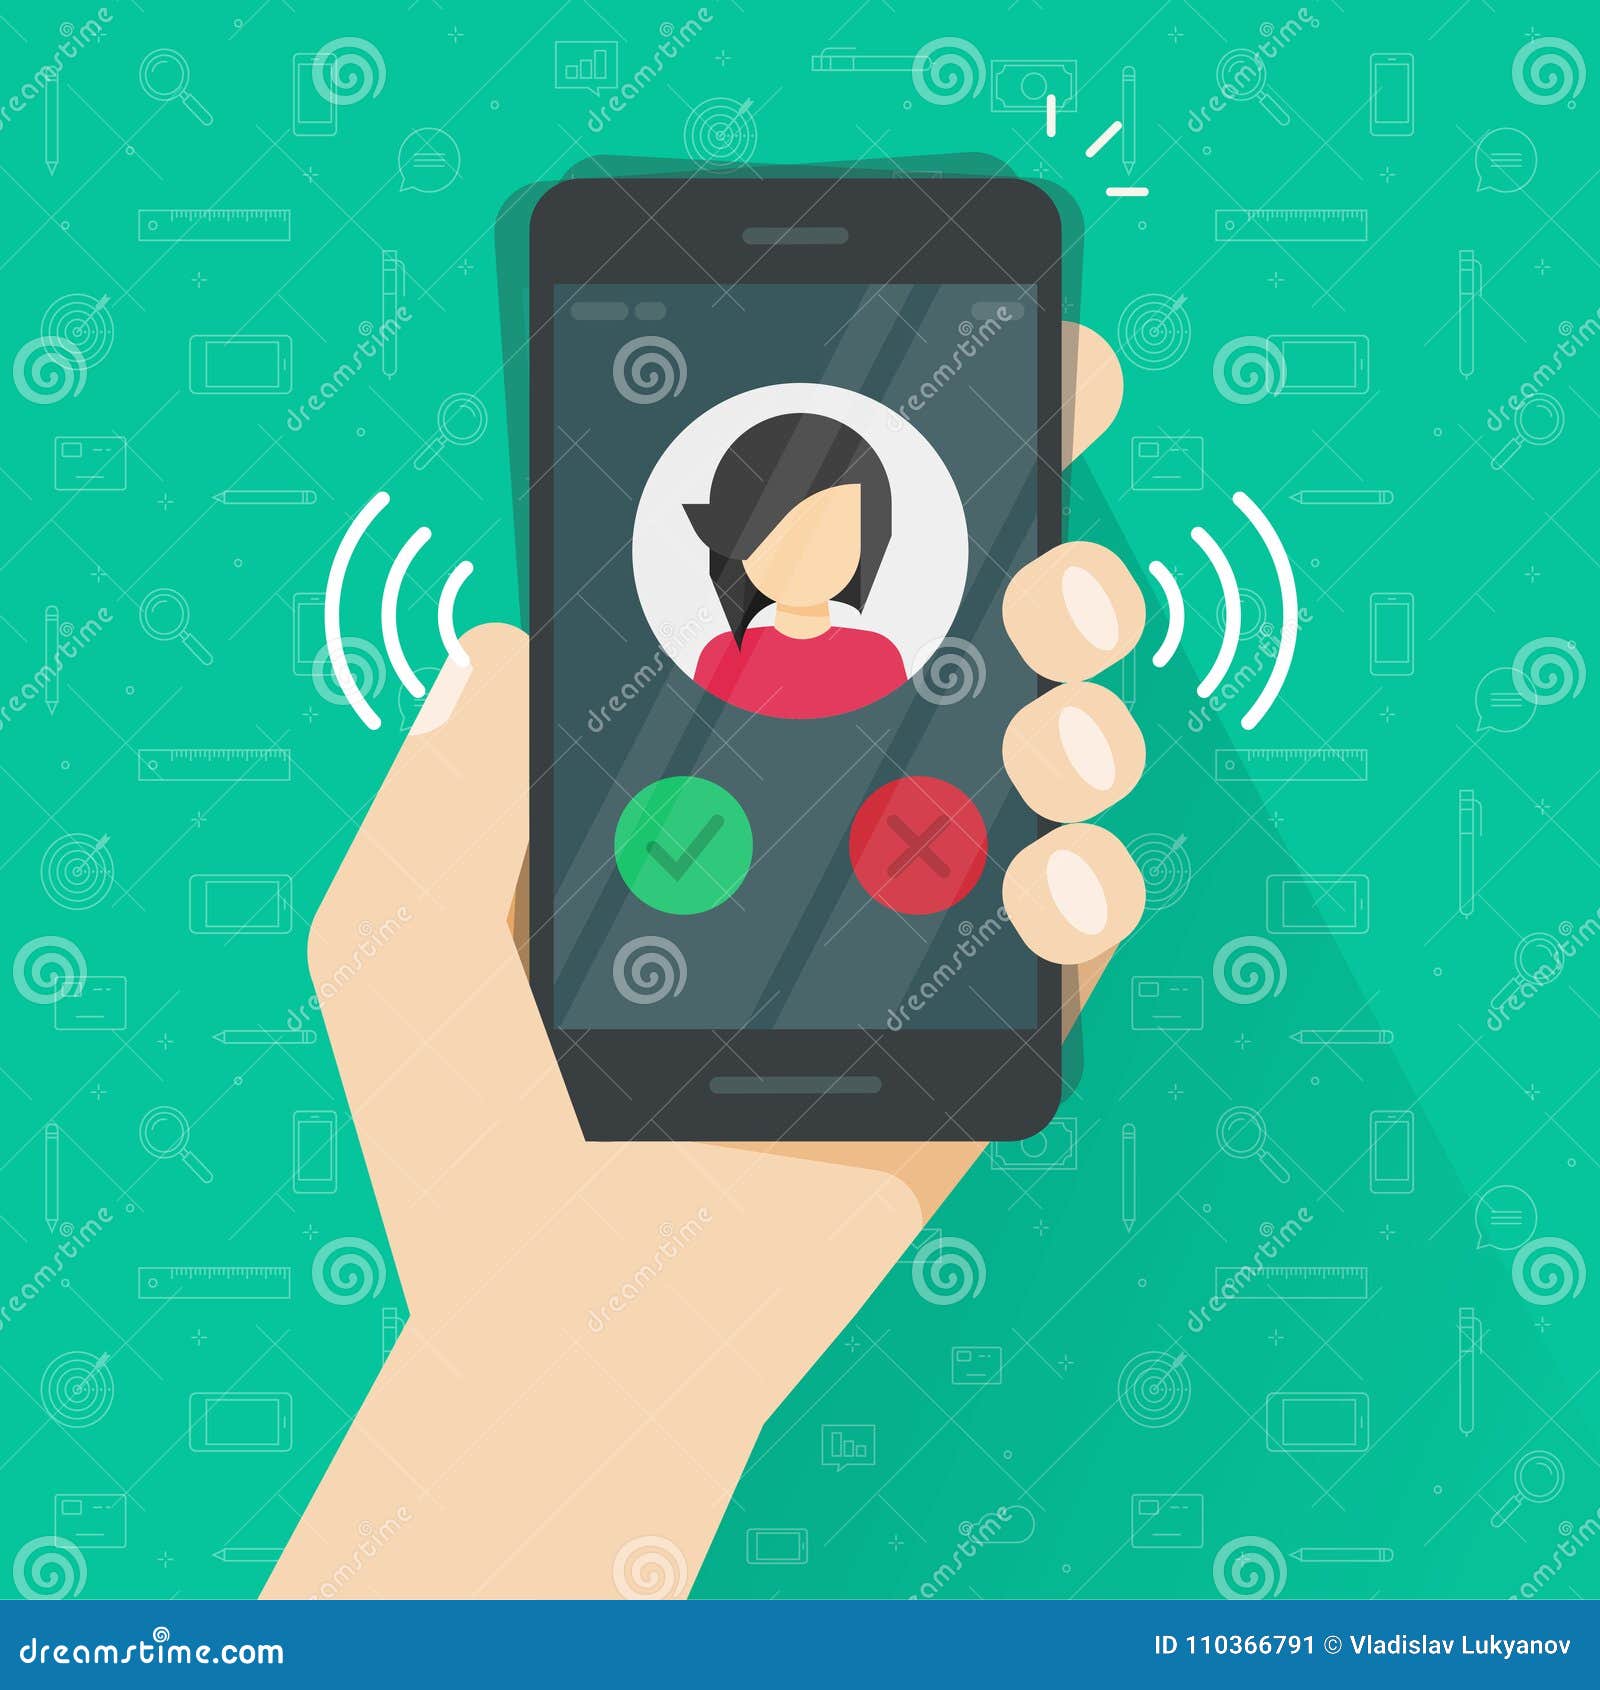 Smartphone Or Mobile Phone Ringing Or Calling Vector Illustration Flat